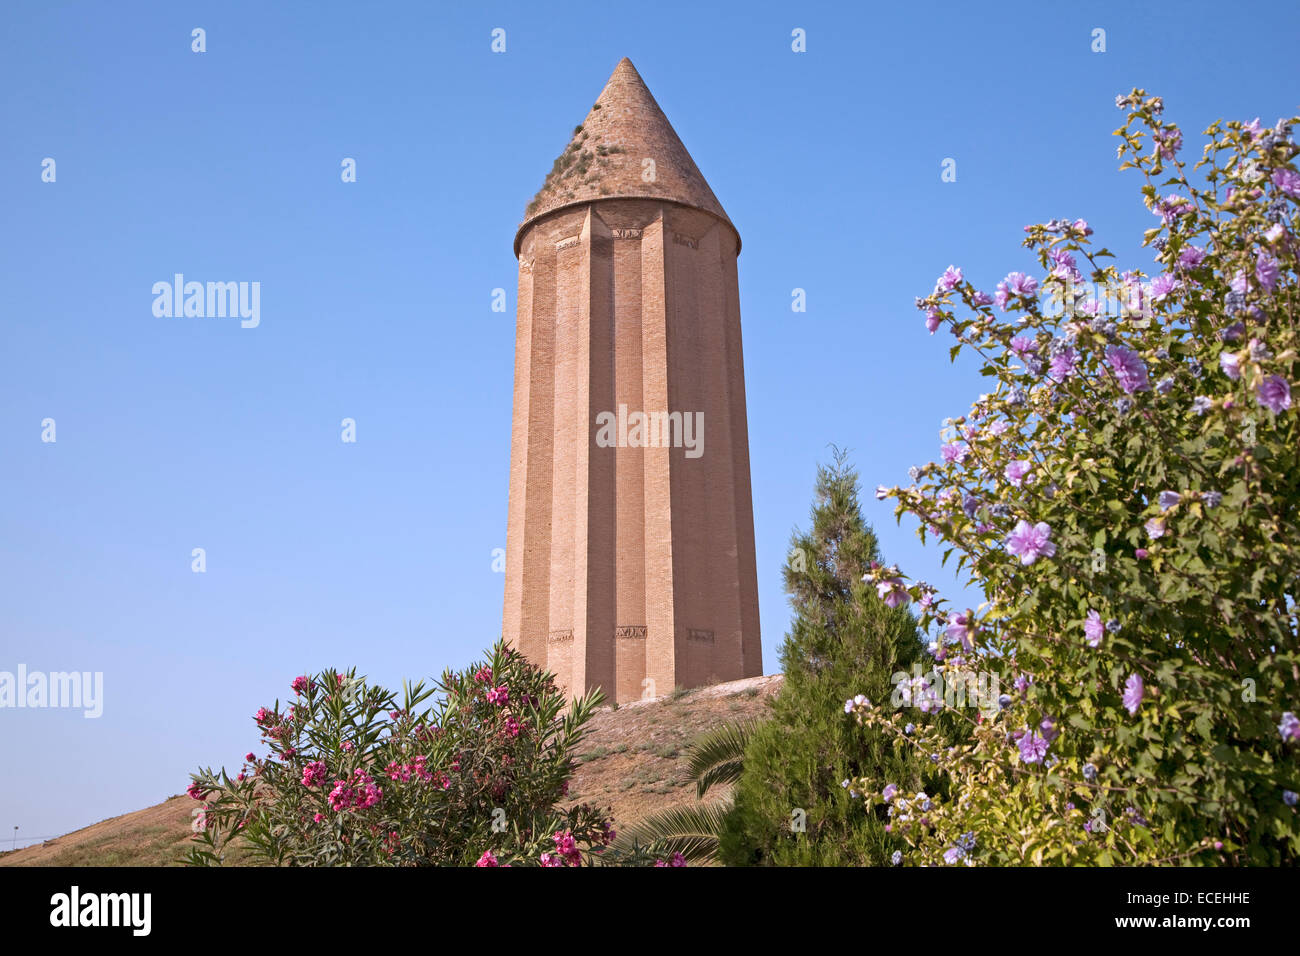 The tower of Kavus, remnant of Ziyarid architecture in Gonbad-e Kavus / Gonbad, Golestan Province, Iran Stock Photo